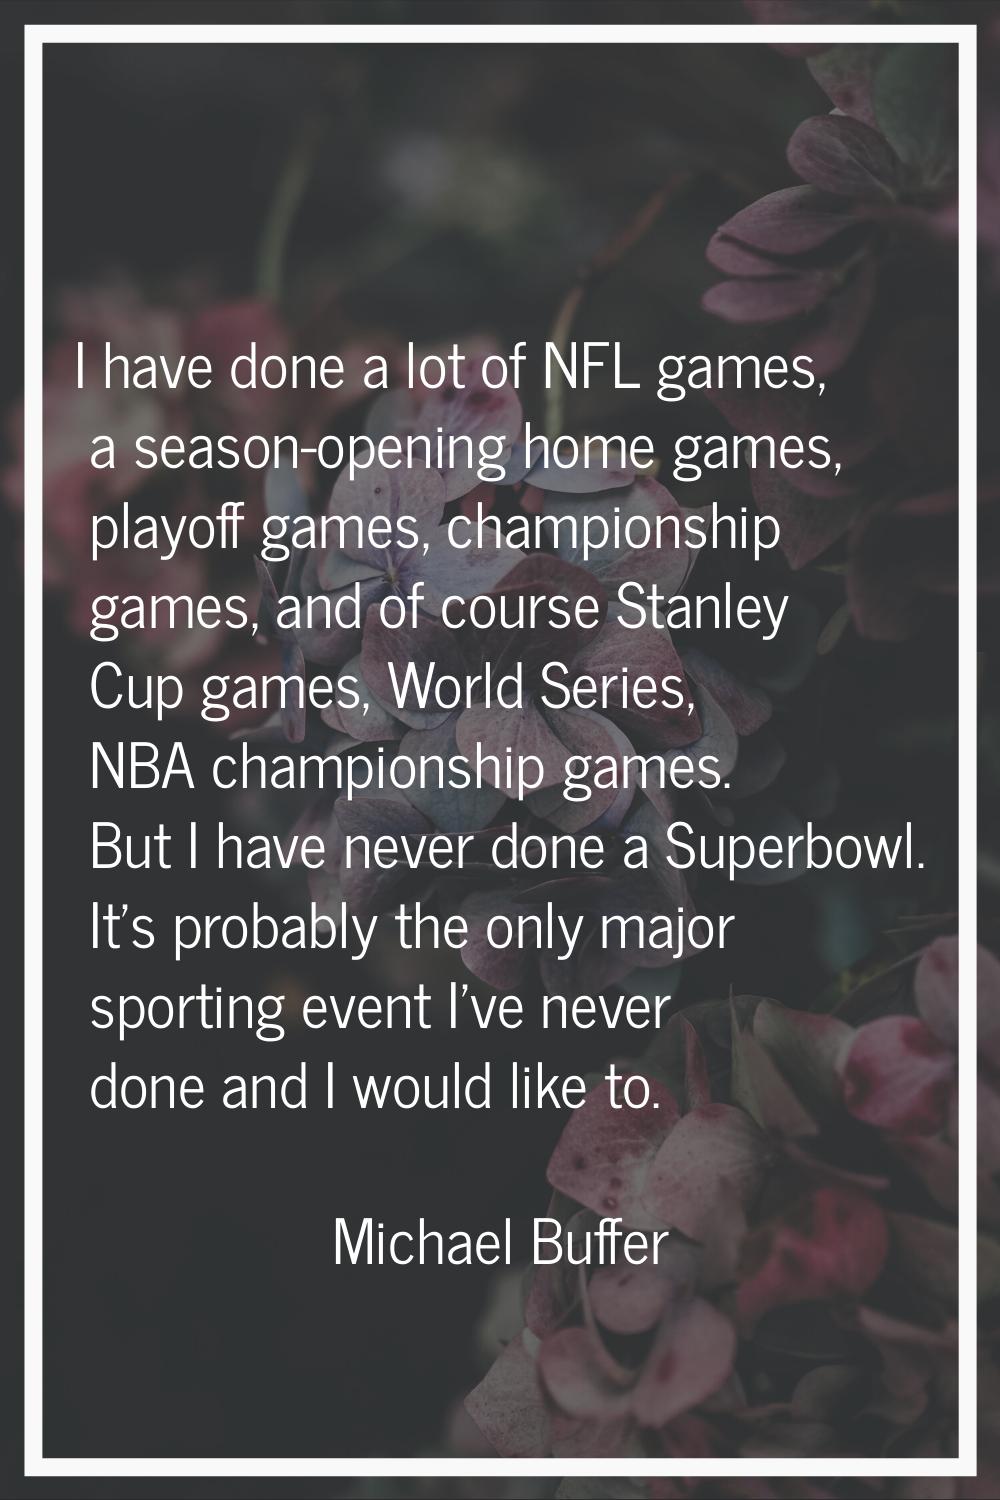 I have done a lot of NFL games, a season-opening home games, playoff games, championship games, and